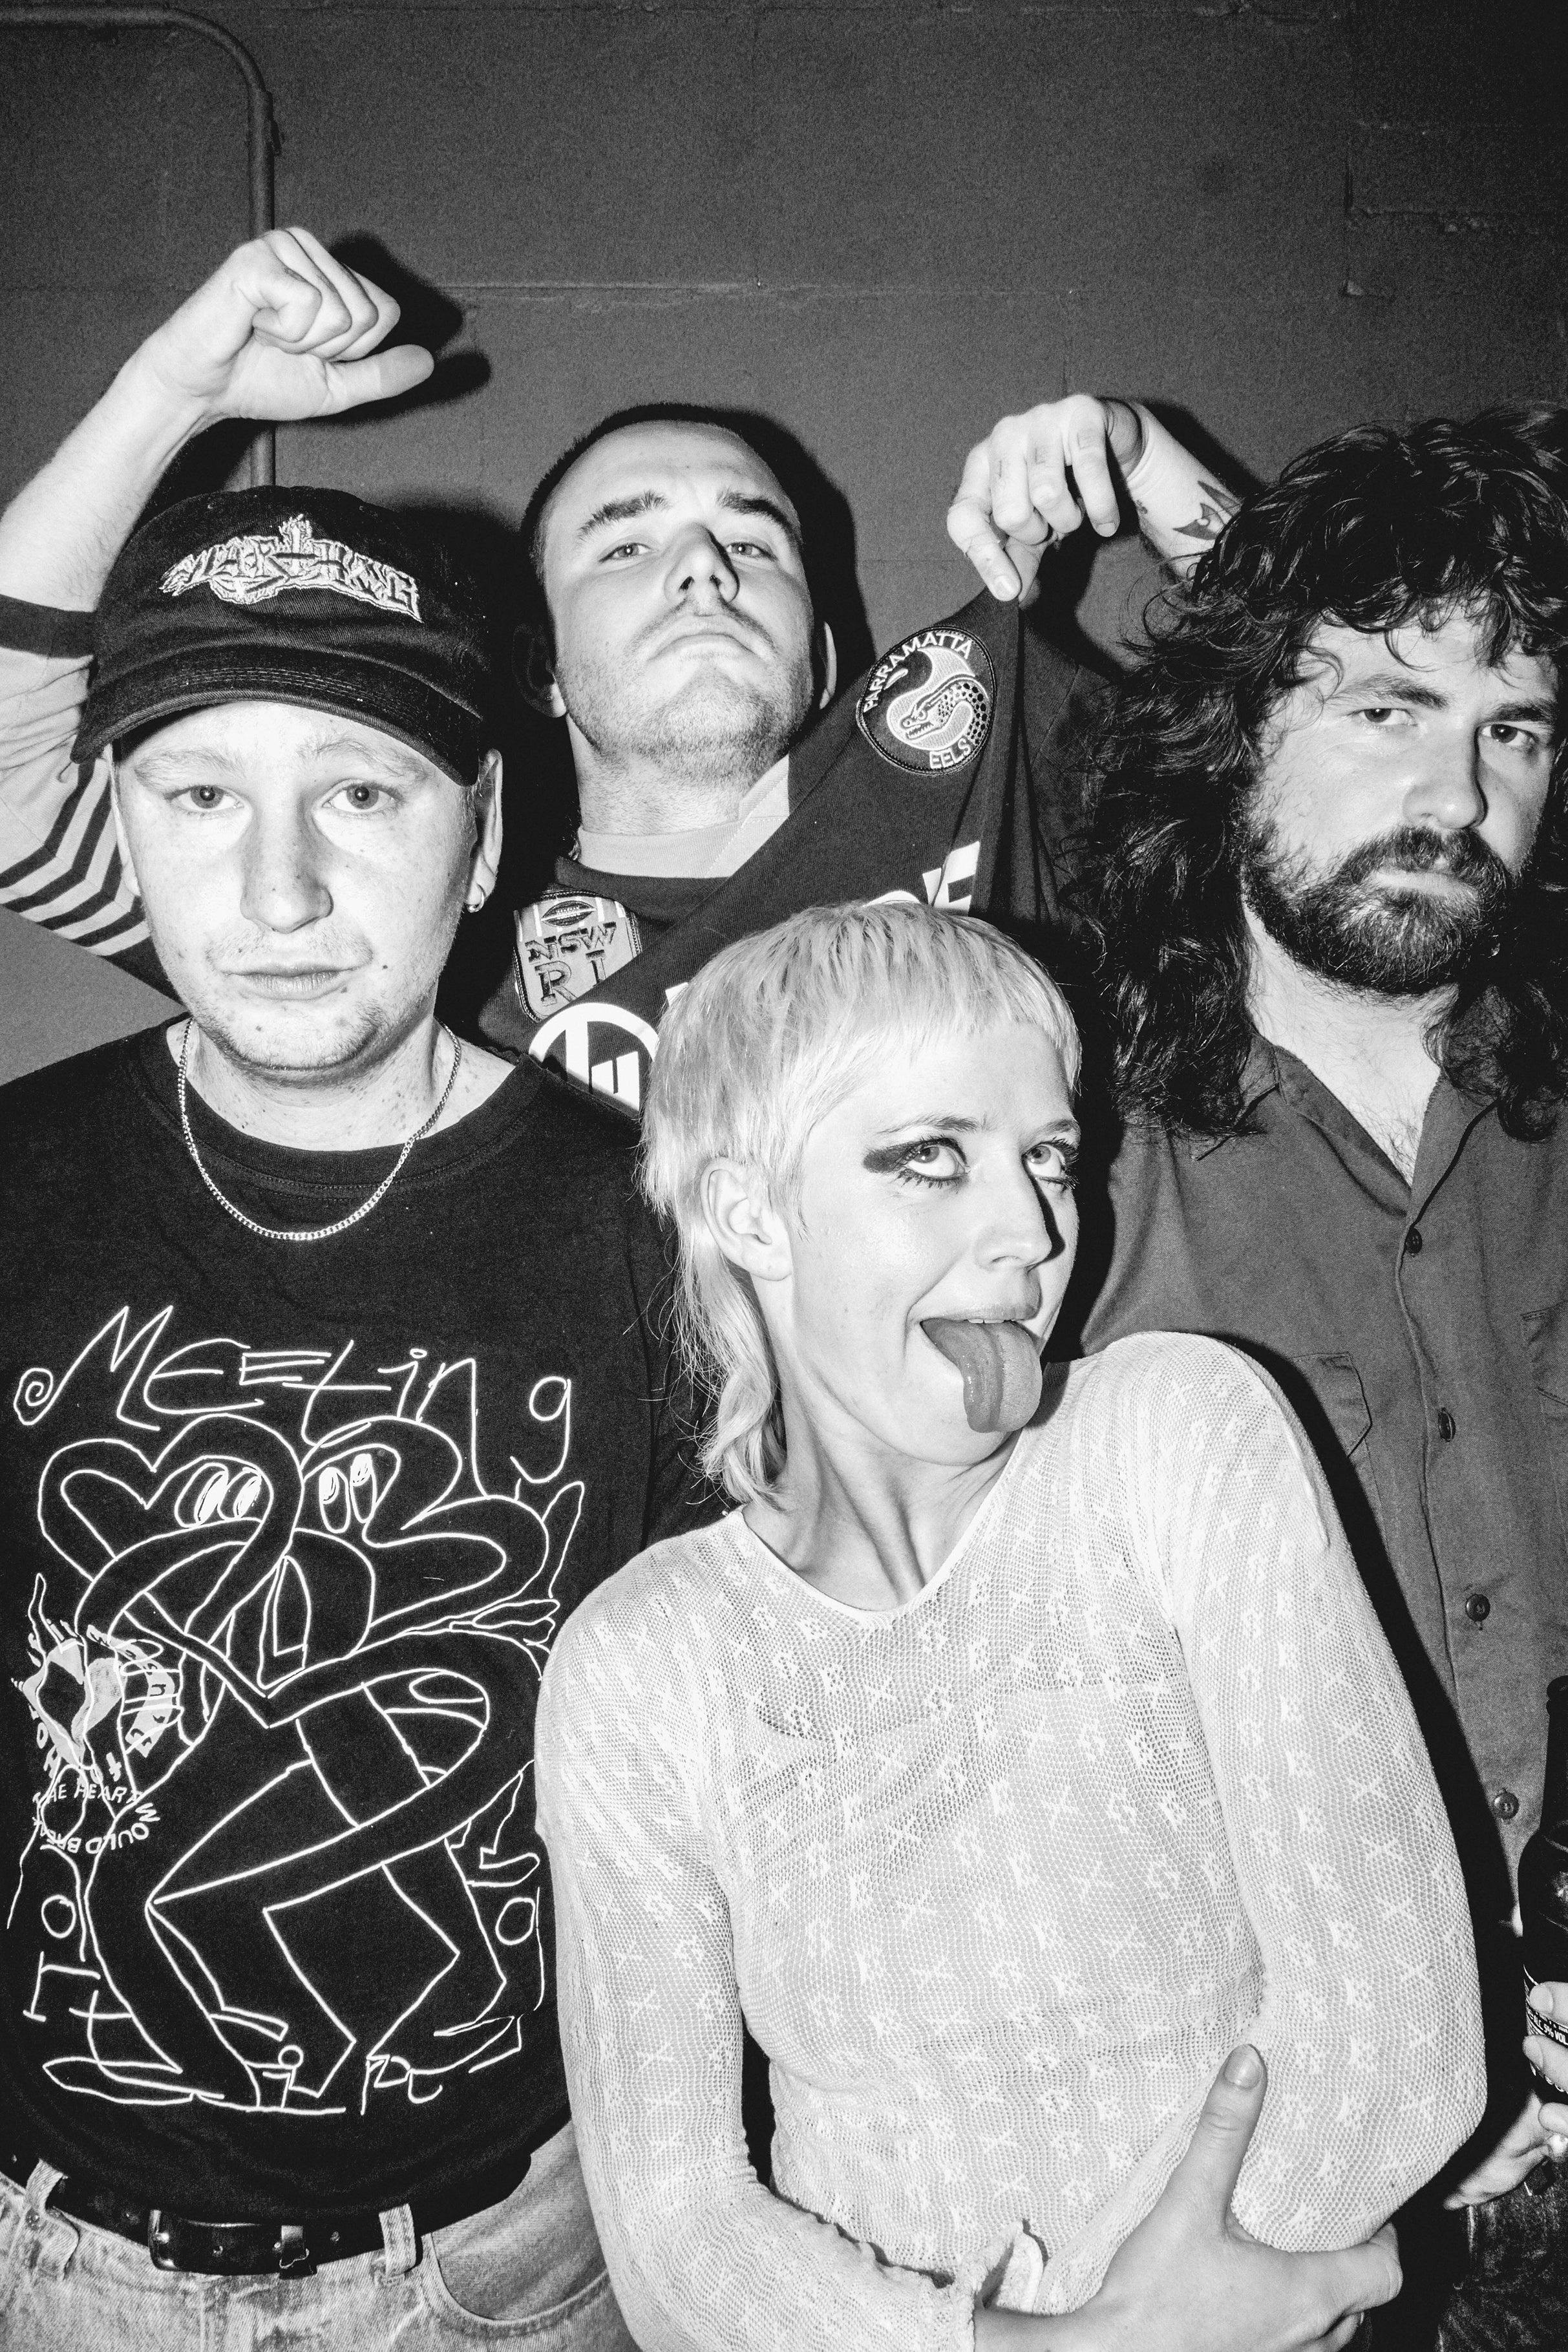 Amyl and the Sniffers at Fox Theater - Oakland - Oakland, CA 94612